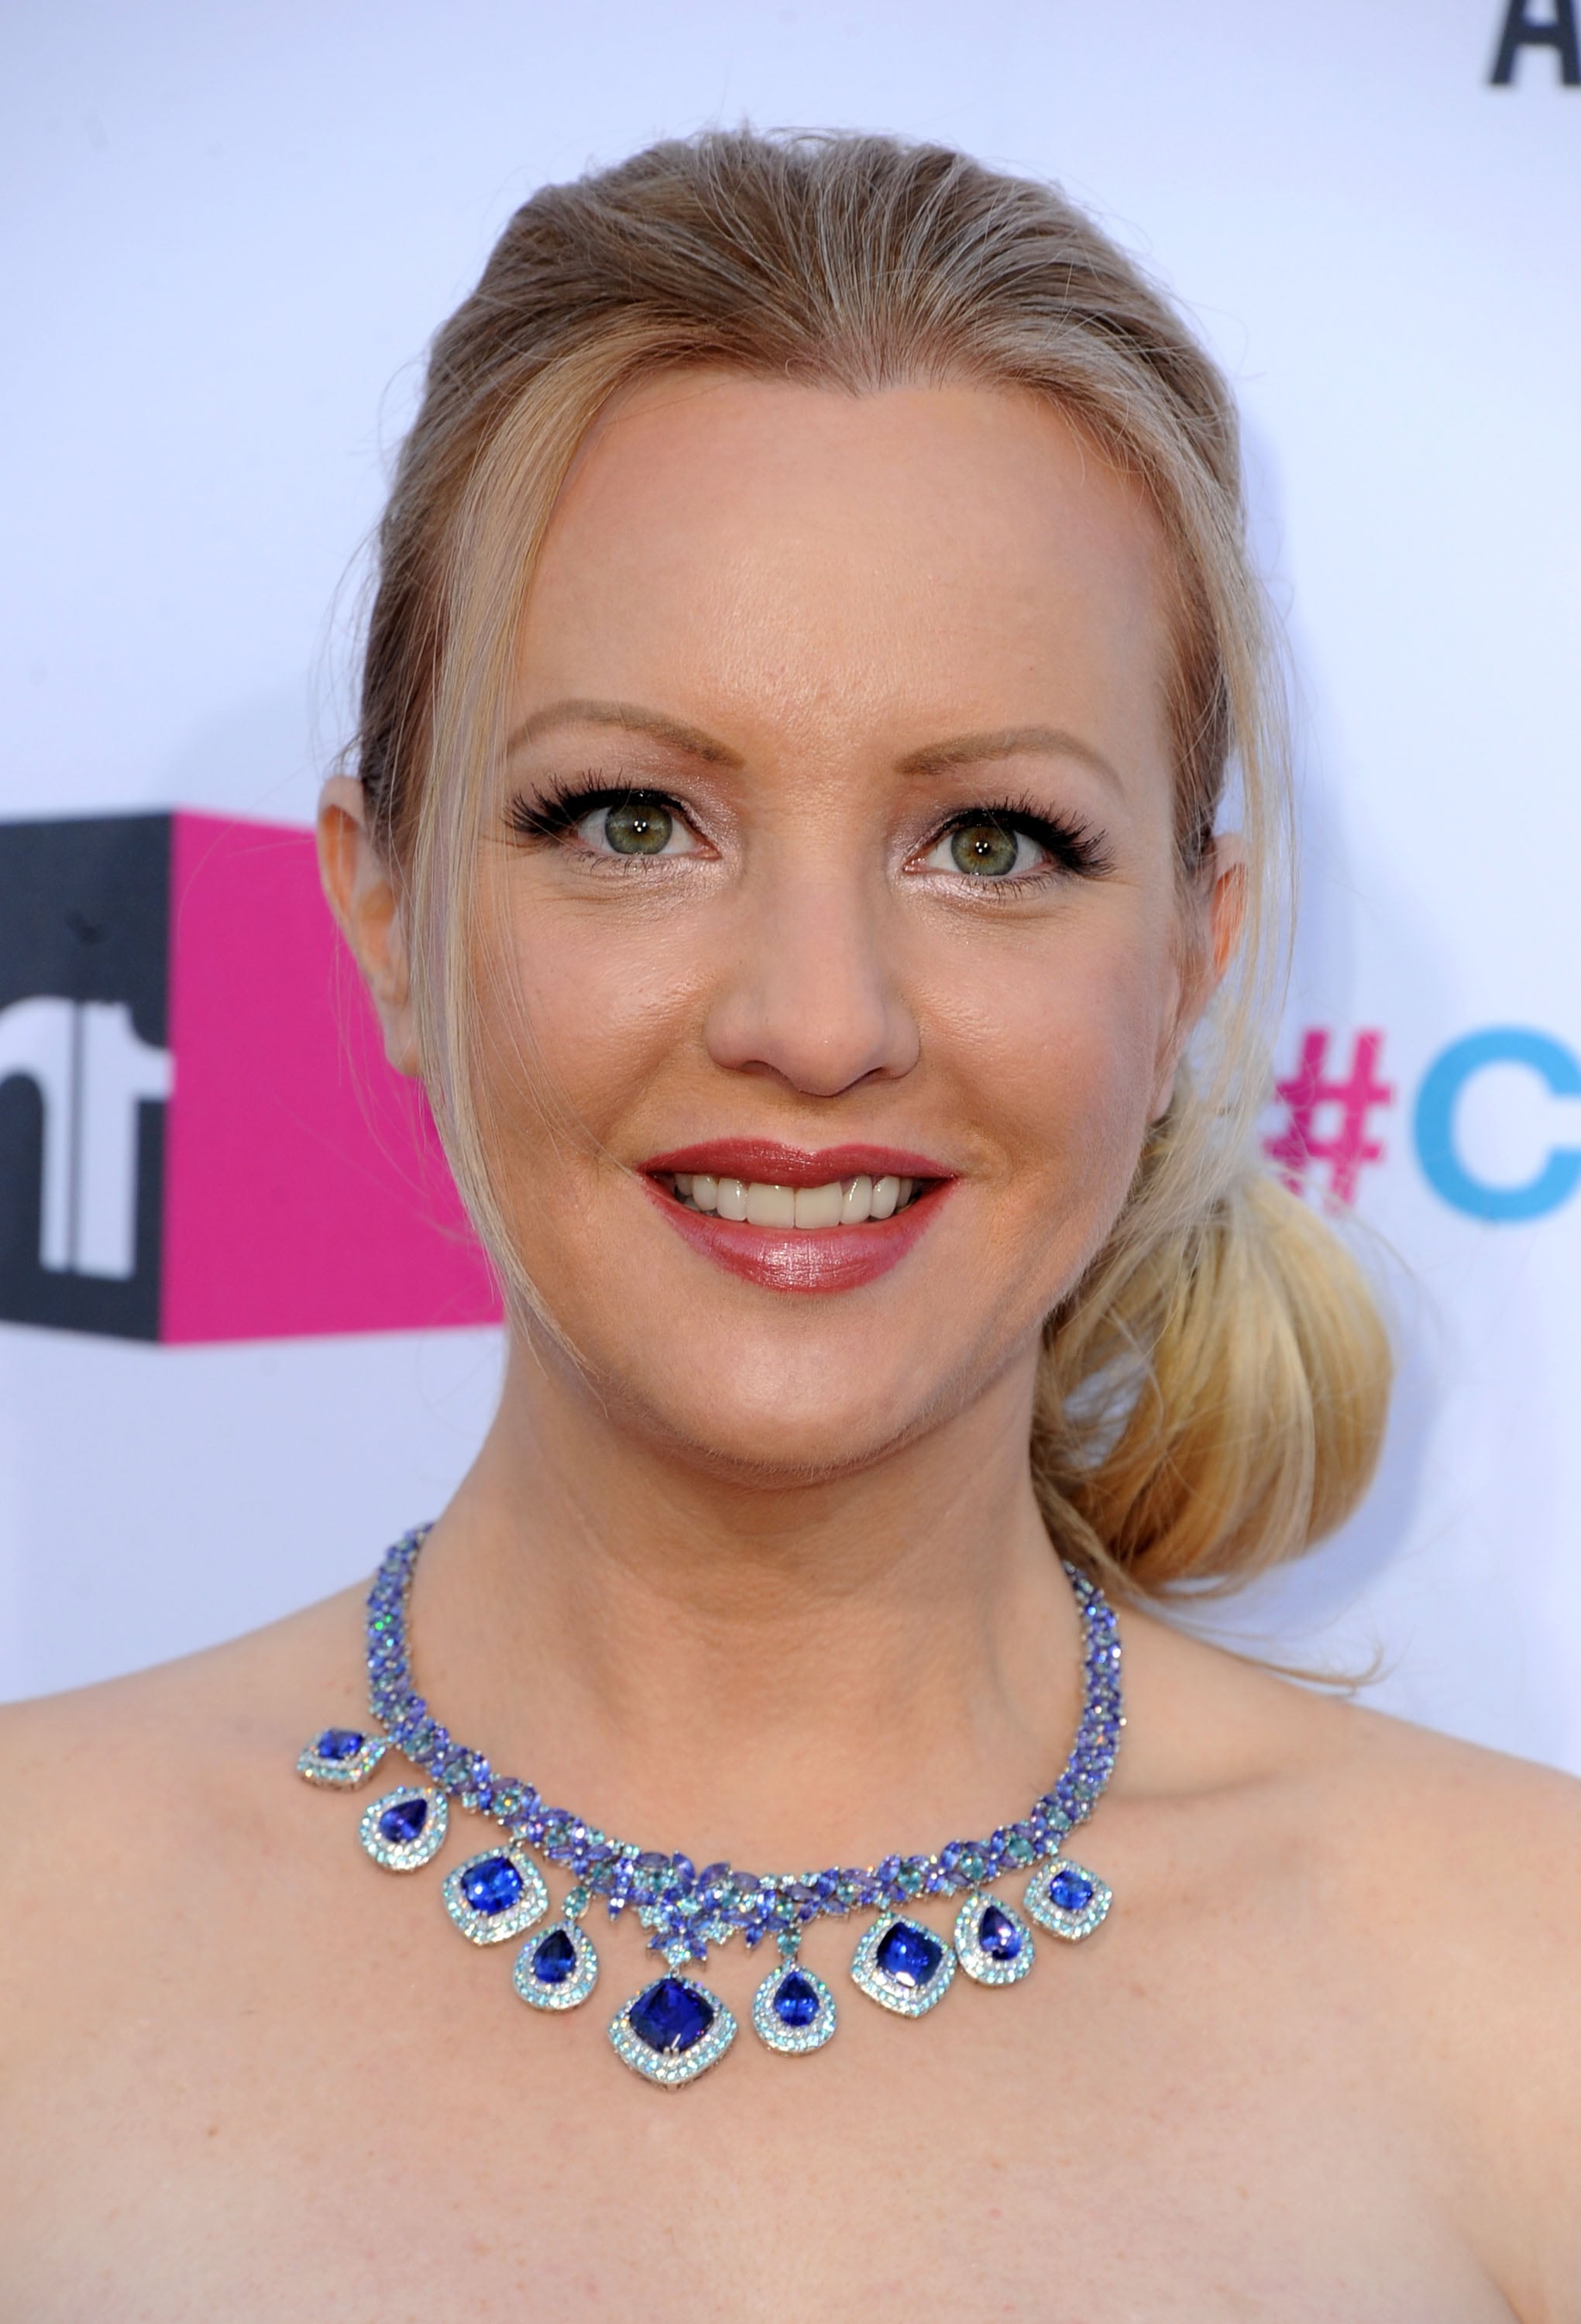 Wendi McLendon-Covey showed off her necklace on the red carpet.